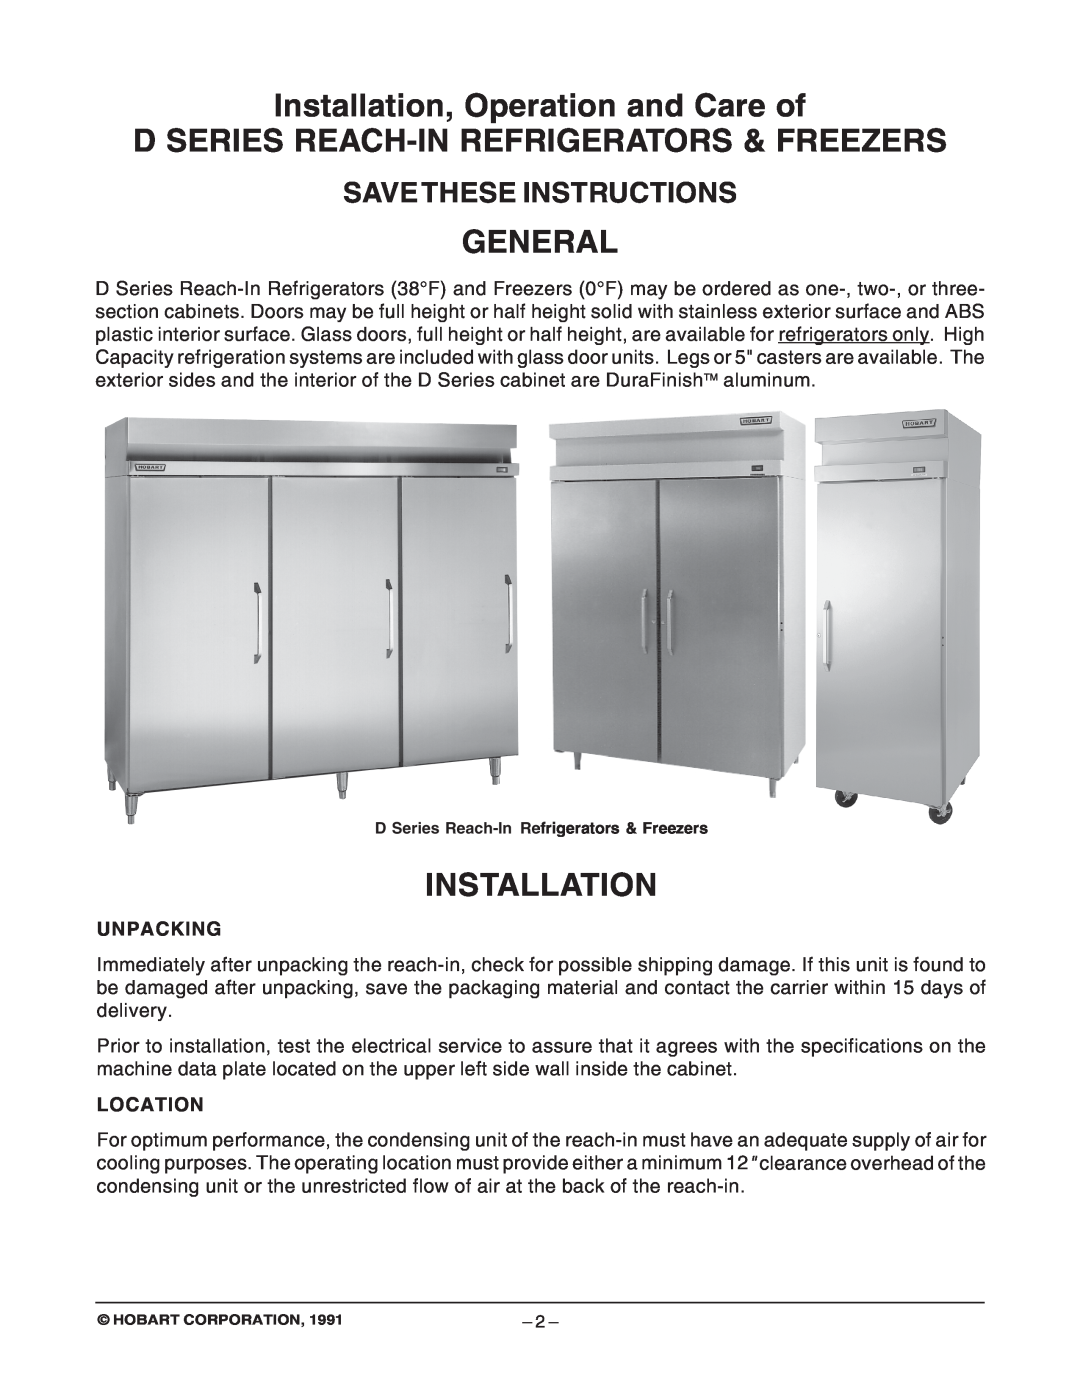 Hobart Installation, Operation and Care of, D Series Reach-Inrefrigerators & Freezers, General, Unpacking, Location 